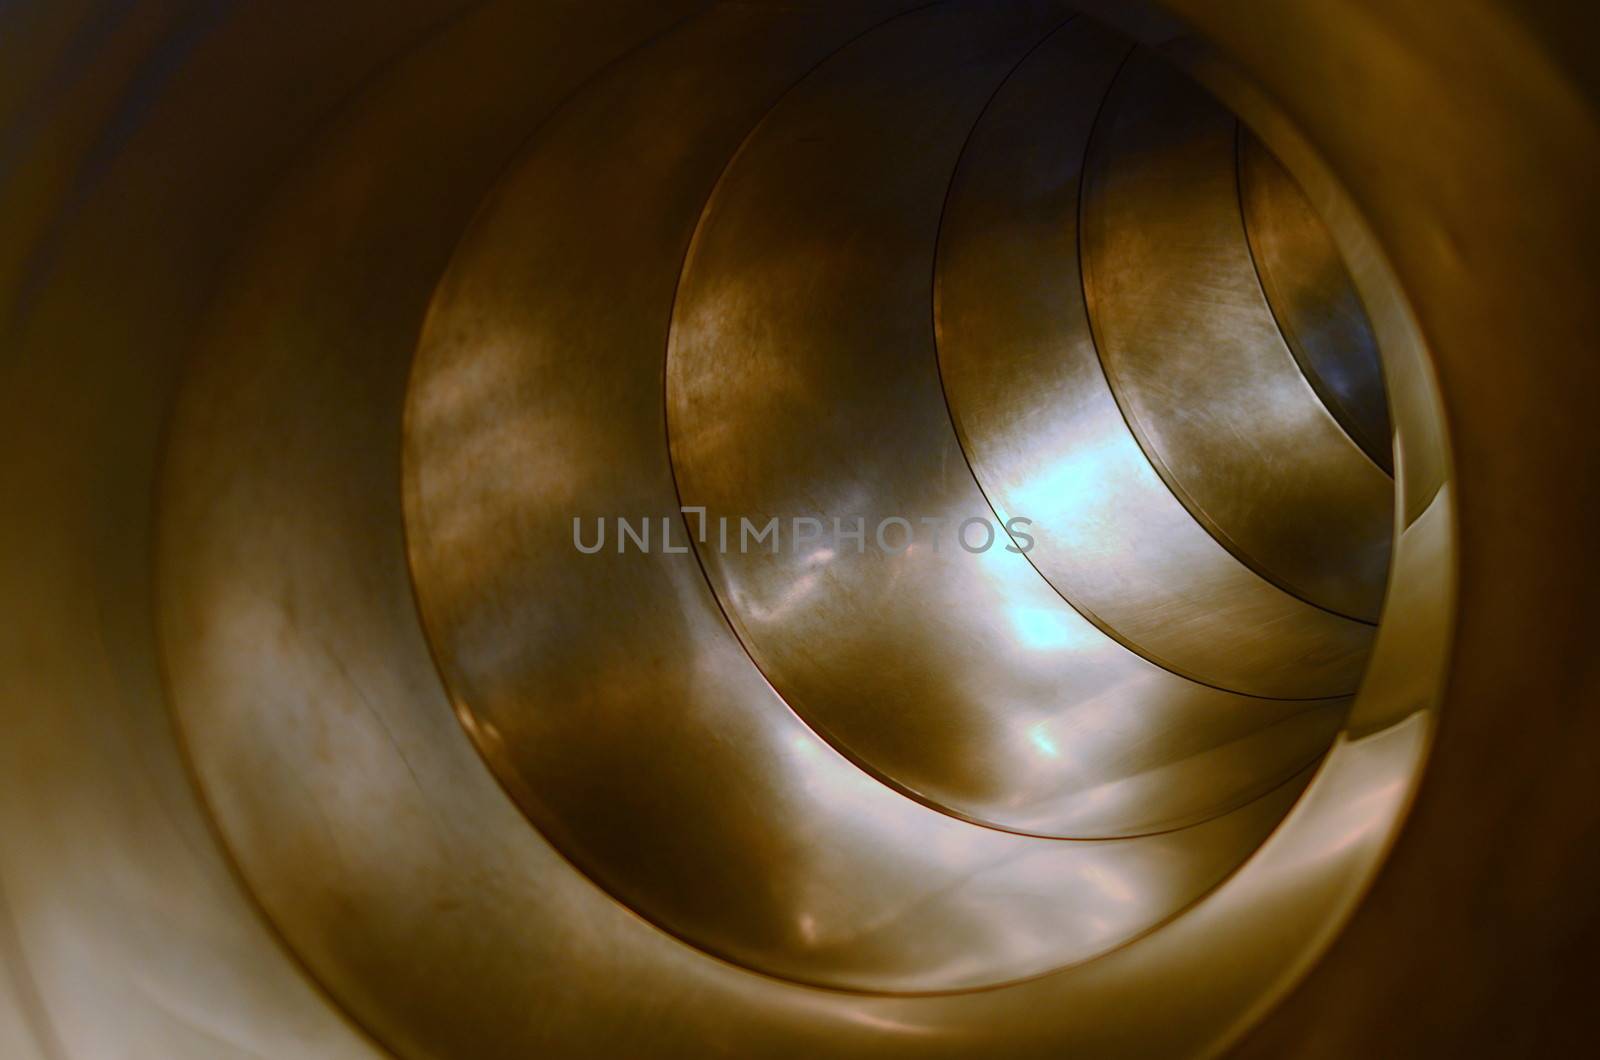 Conceptual Image Of The Inside Of A Curved Metal Tube